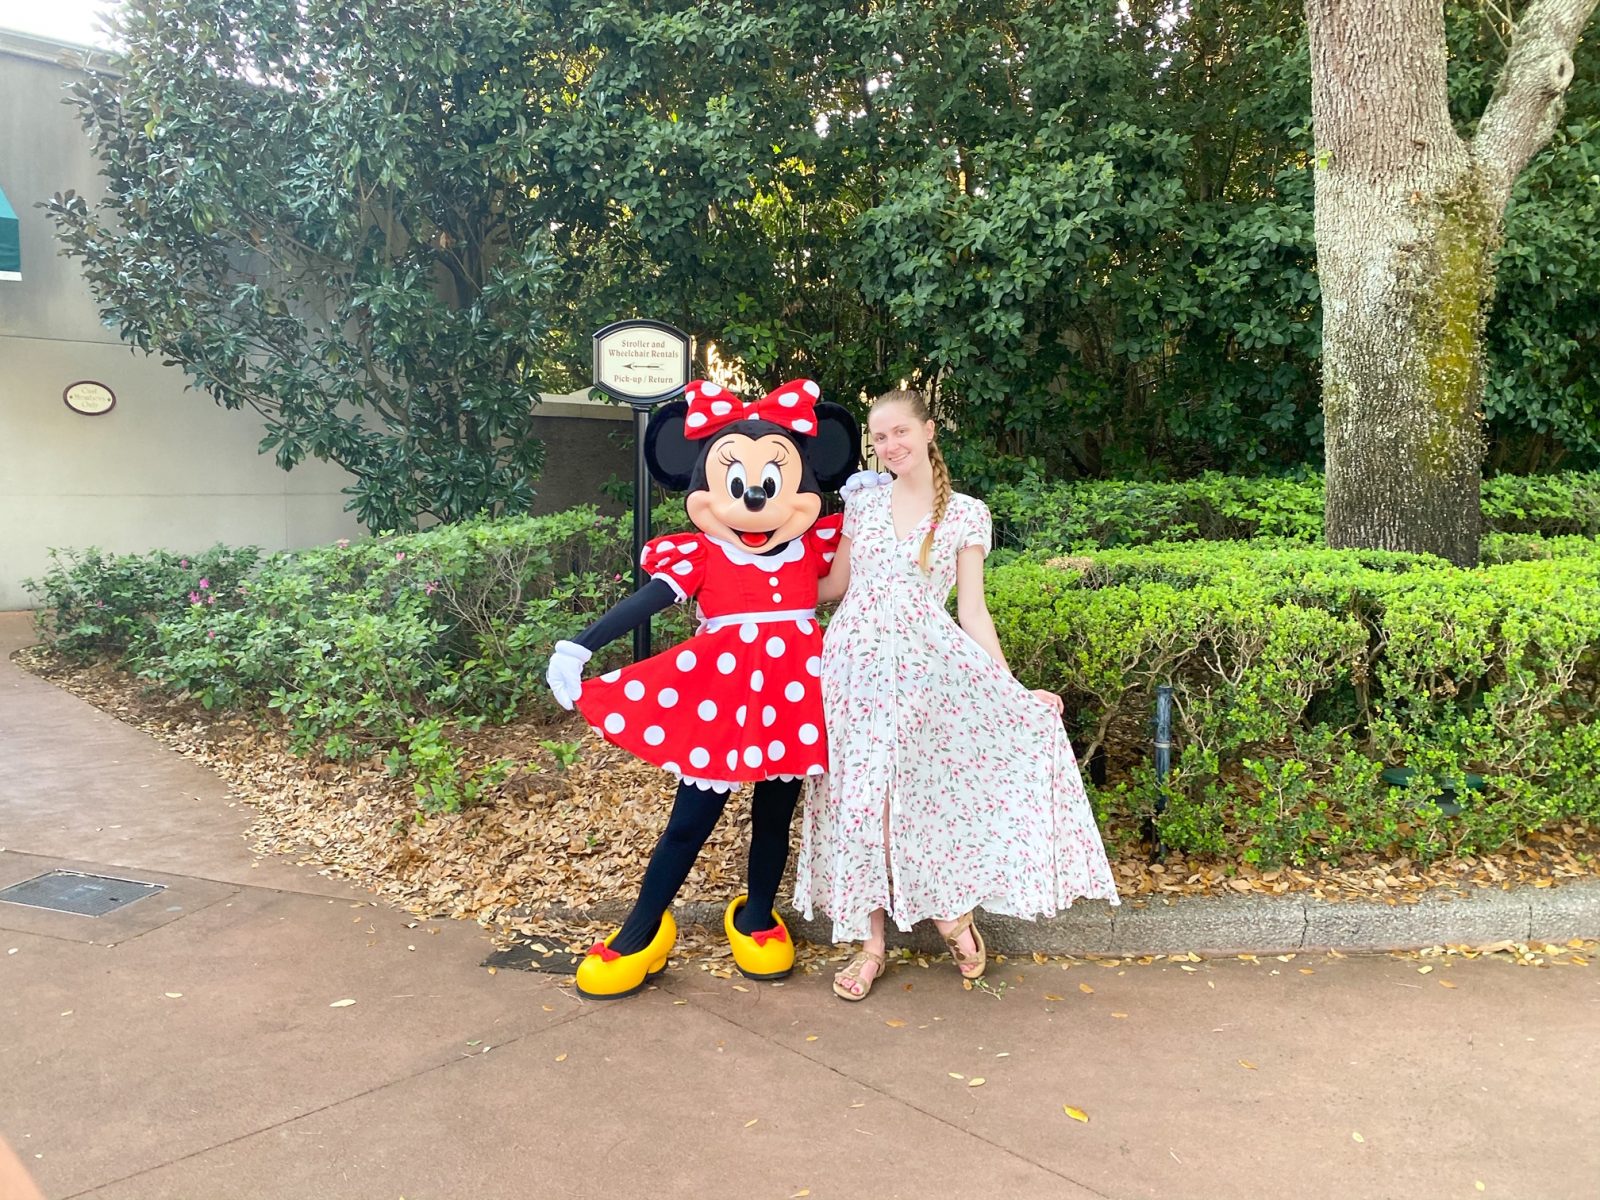 Victoria with a Disney Memory Maker photo that features Minnie Mouse! Both wear cute dresses. 